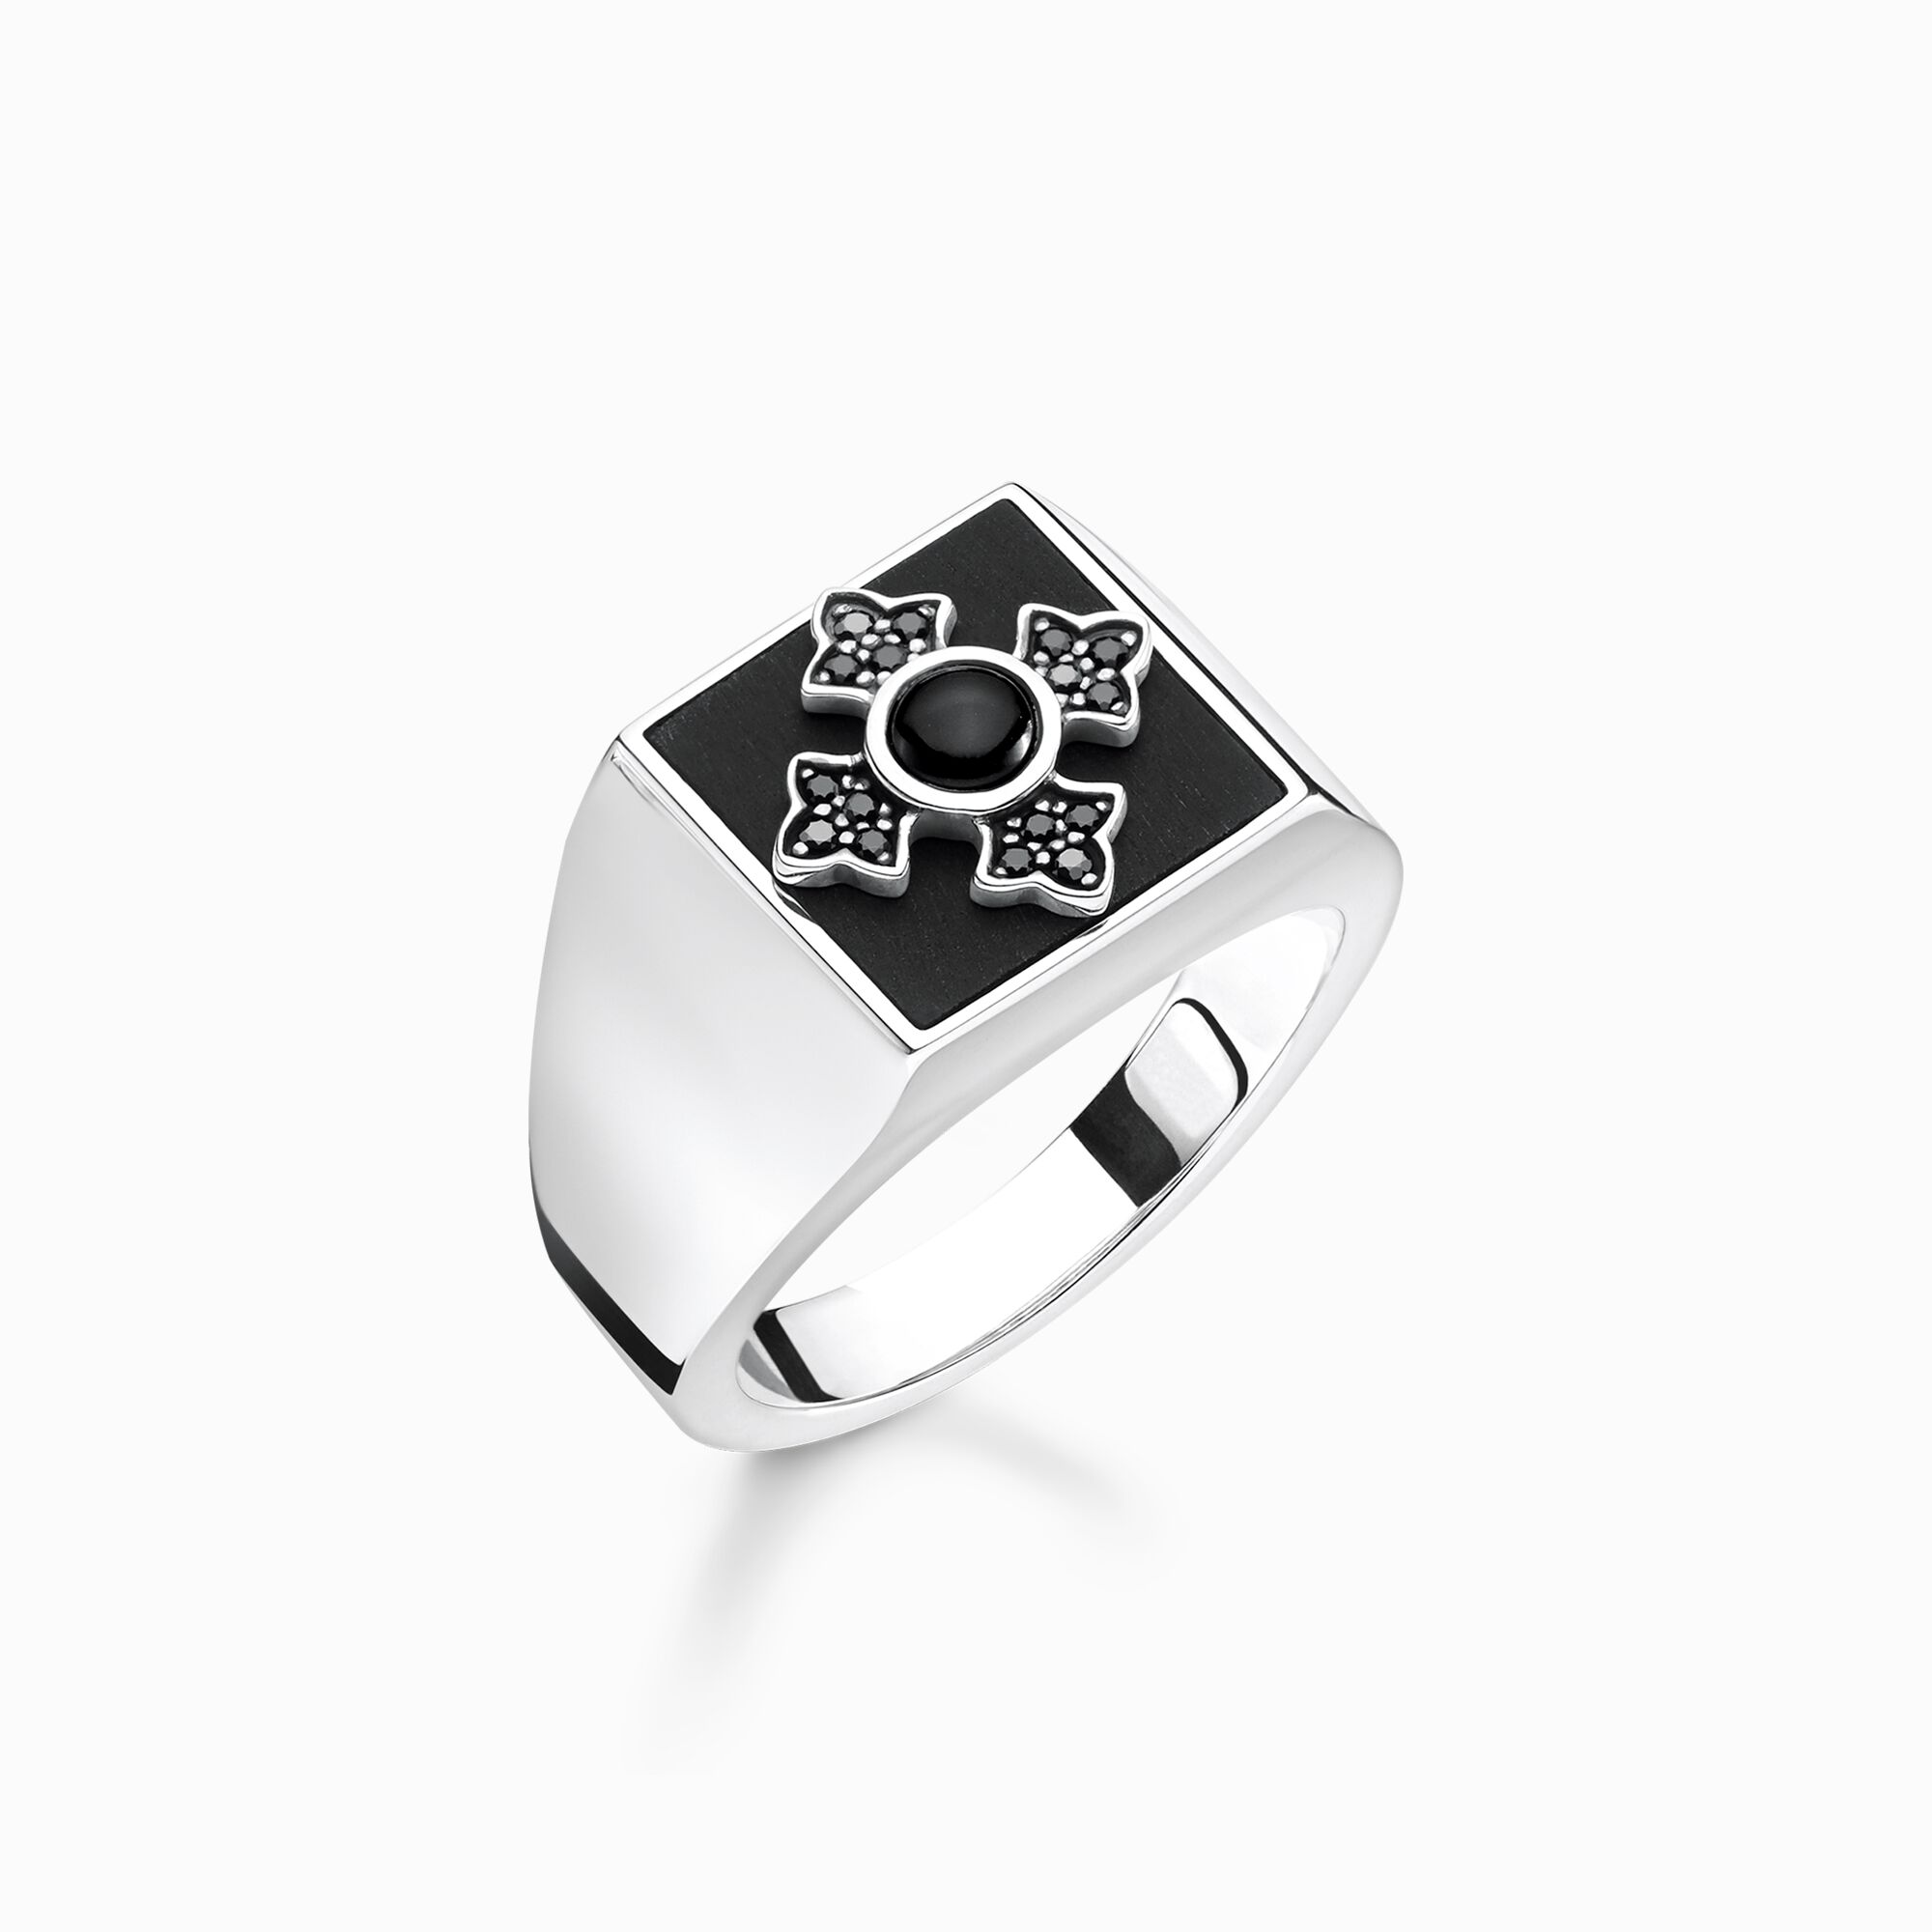 Ring cross royalty from the  collection in the THOMAS SABO online store